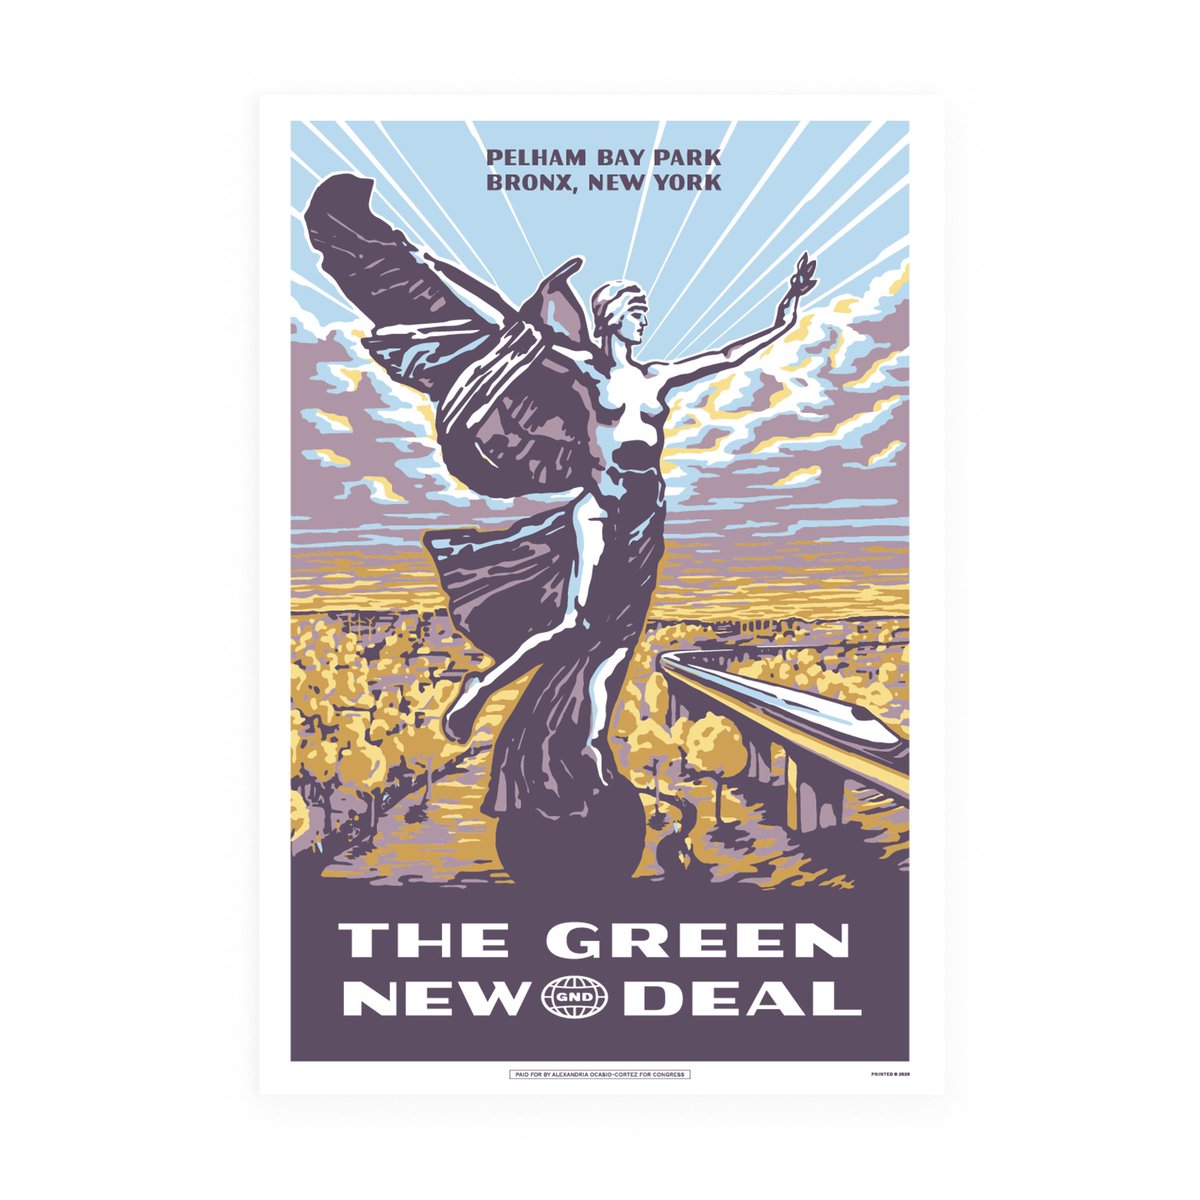 Next is Scott Starrett's Pelham Bay Park poster, celebrating the Bronx's most iconic WPA success story, a beloved beach and golf course. https://shop.ocasiocortez.com/collections/all/products/pelham-bay-park-gnd-poster7/